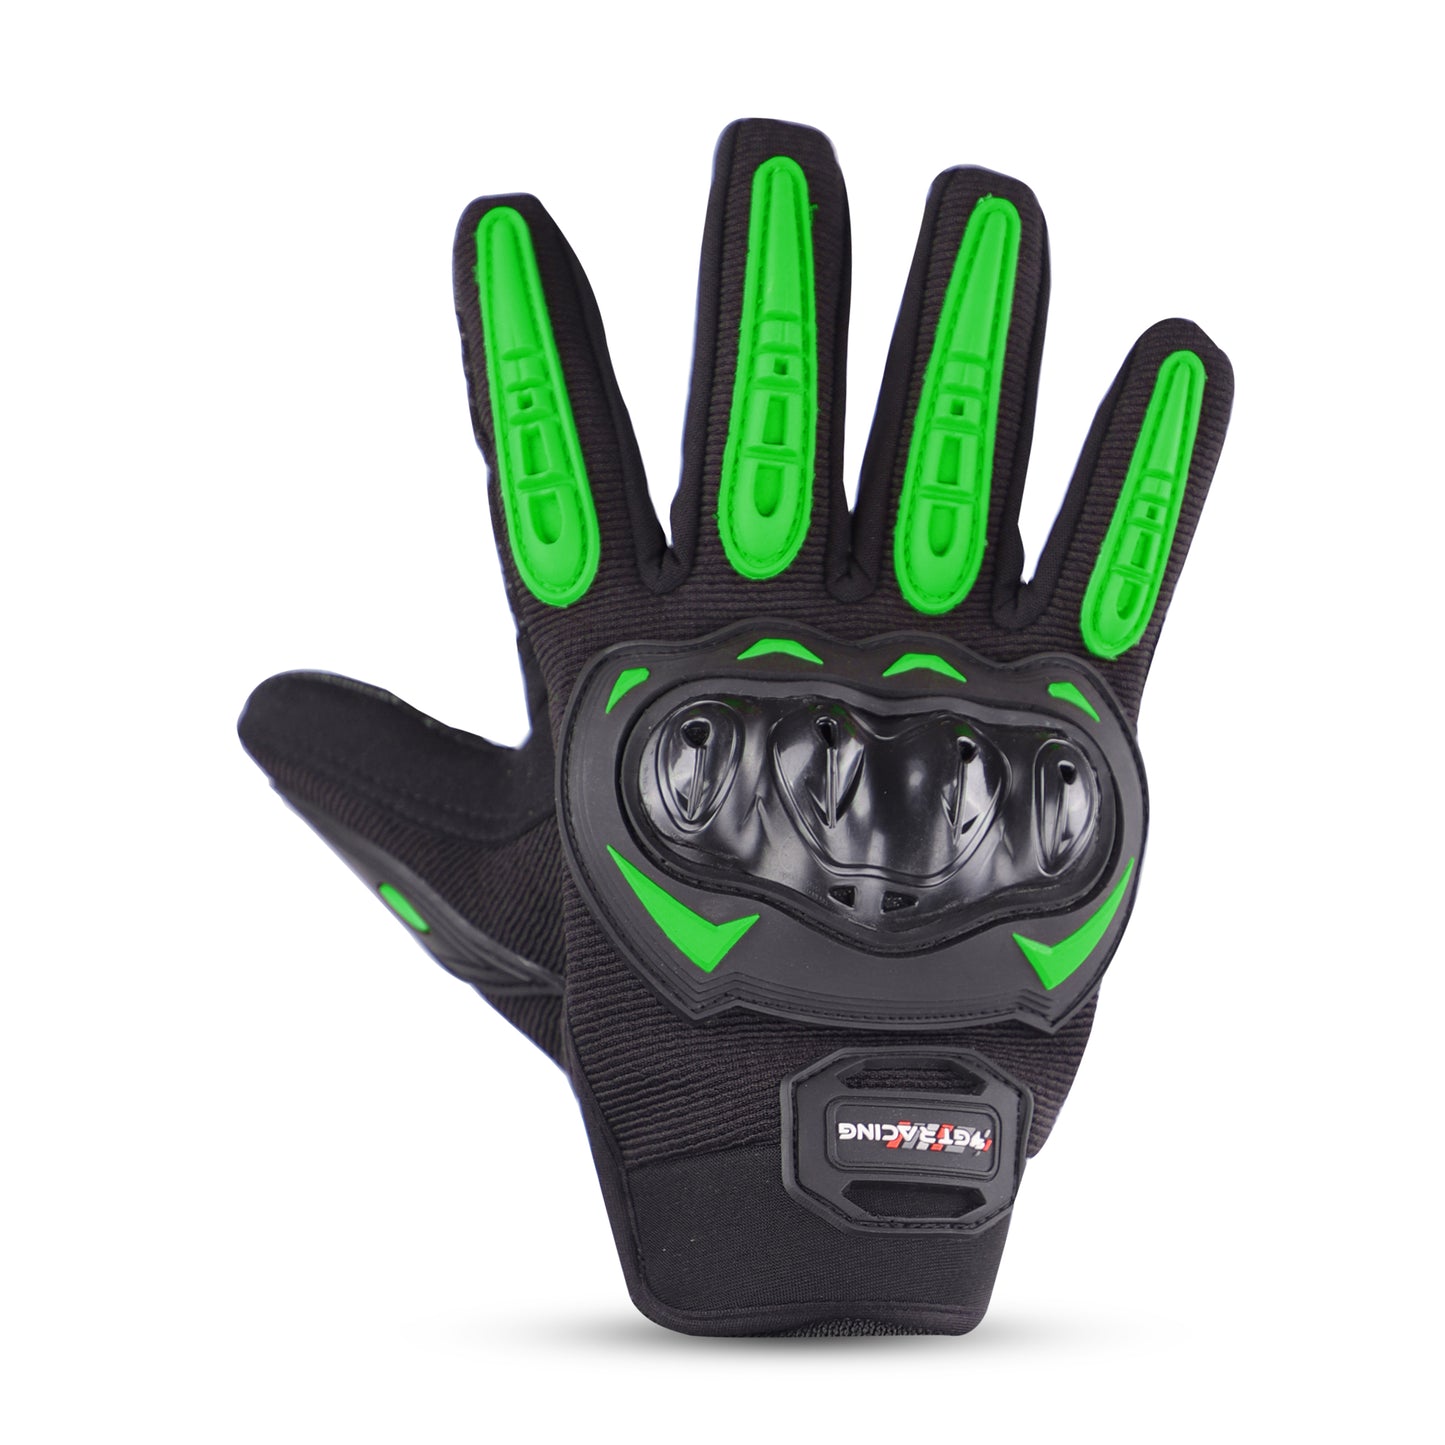 Steelbird GT-17 Full Finger Bike Riding Gloves with Touch Screen Sensitivity at Thumb and Index Finger, Protective Off-Road Motorbike Racing (Green)